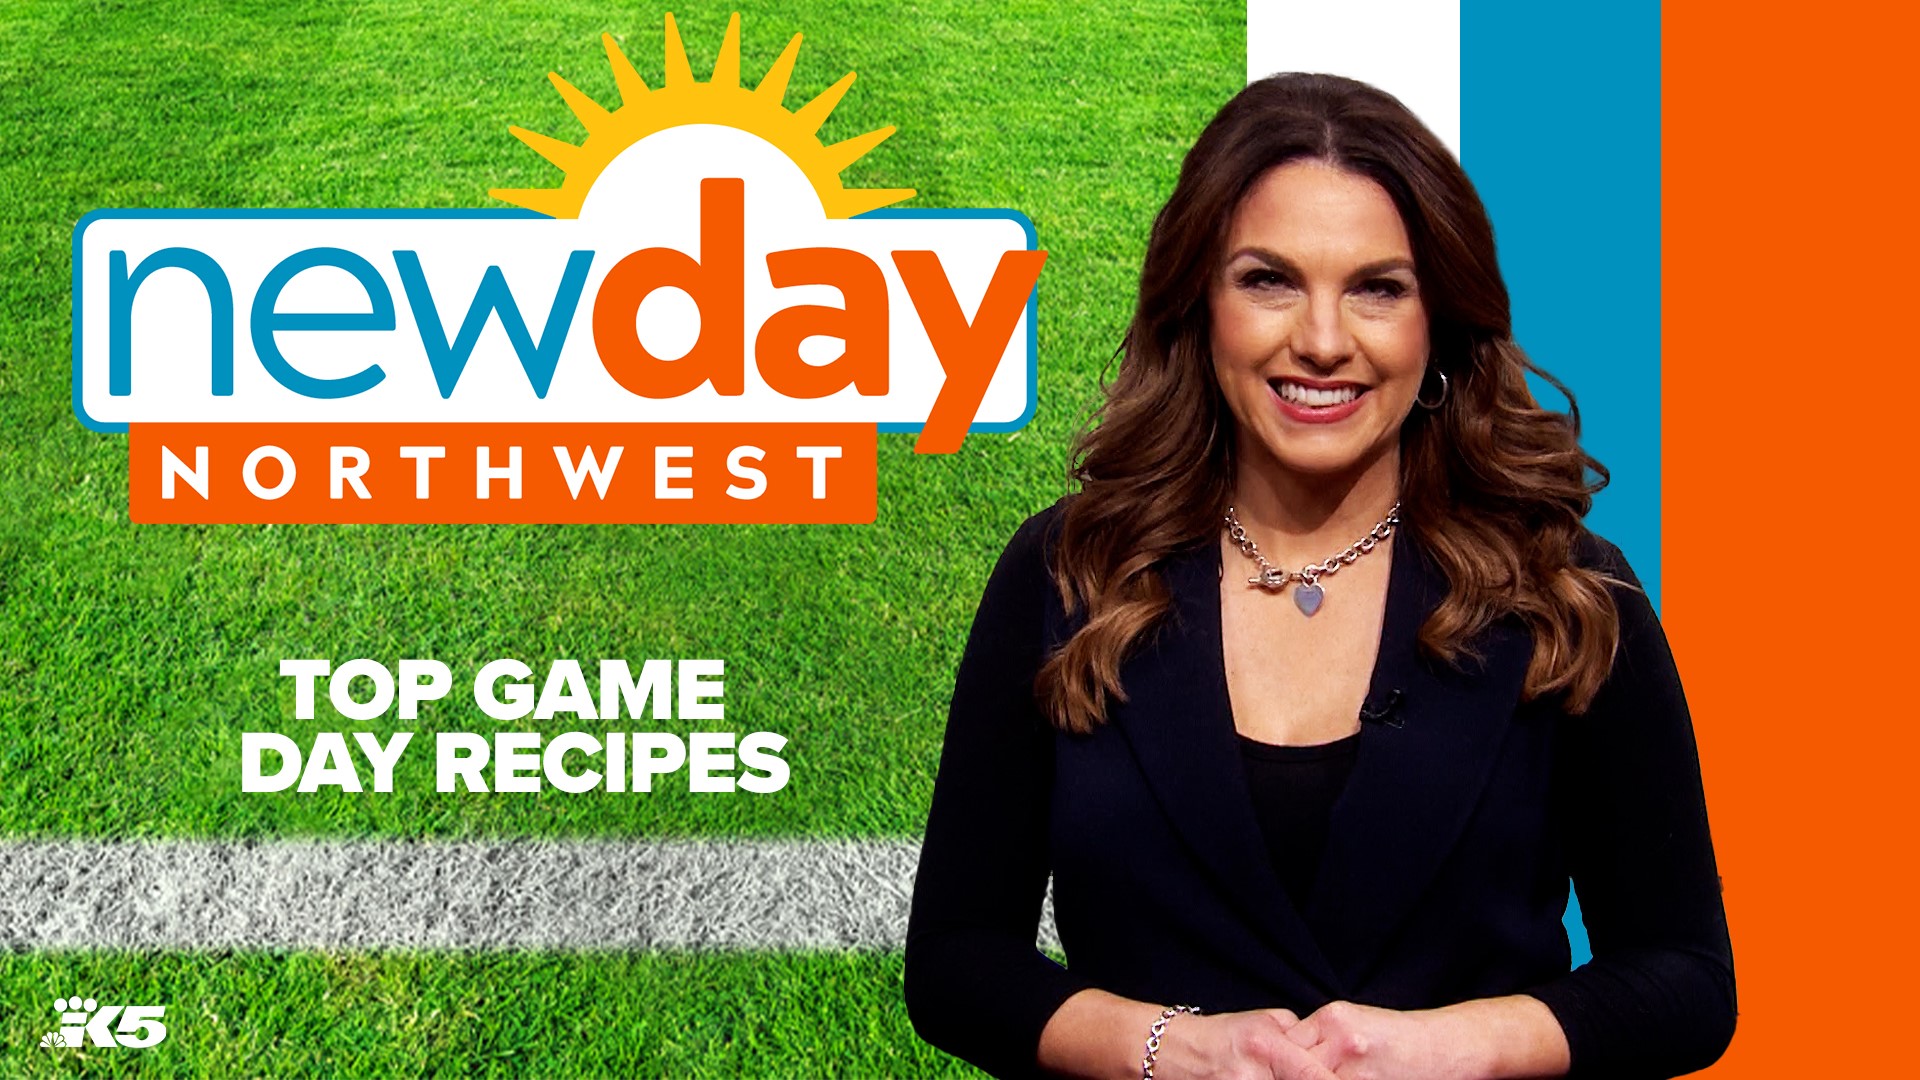 New Day host Amity Addrisi showcases some of the show's favorite Super Bowl game day recipes